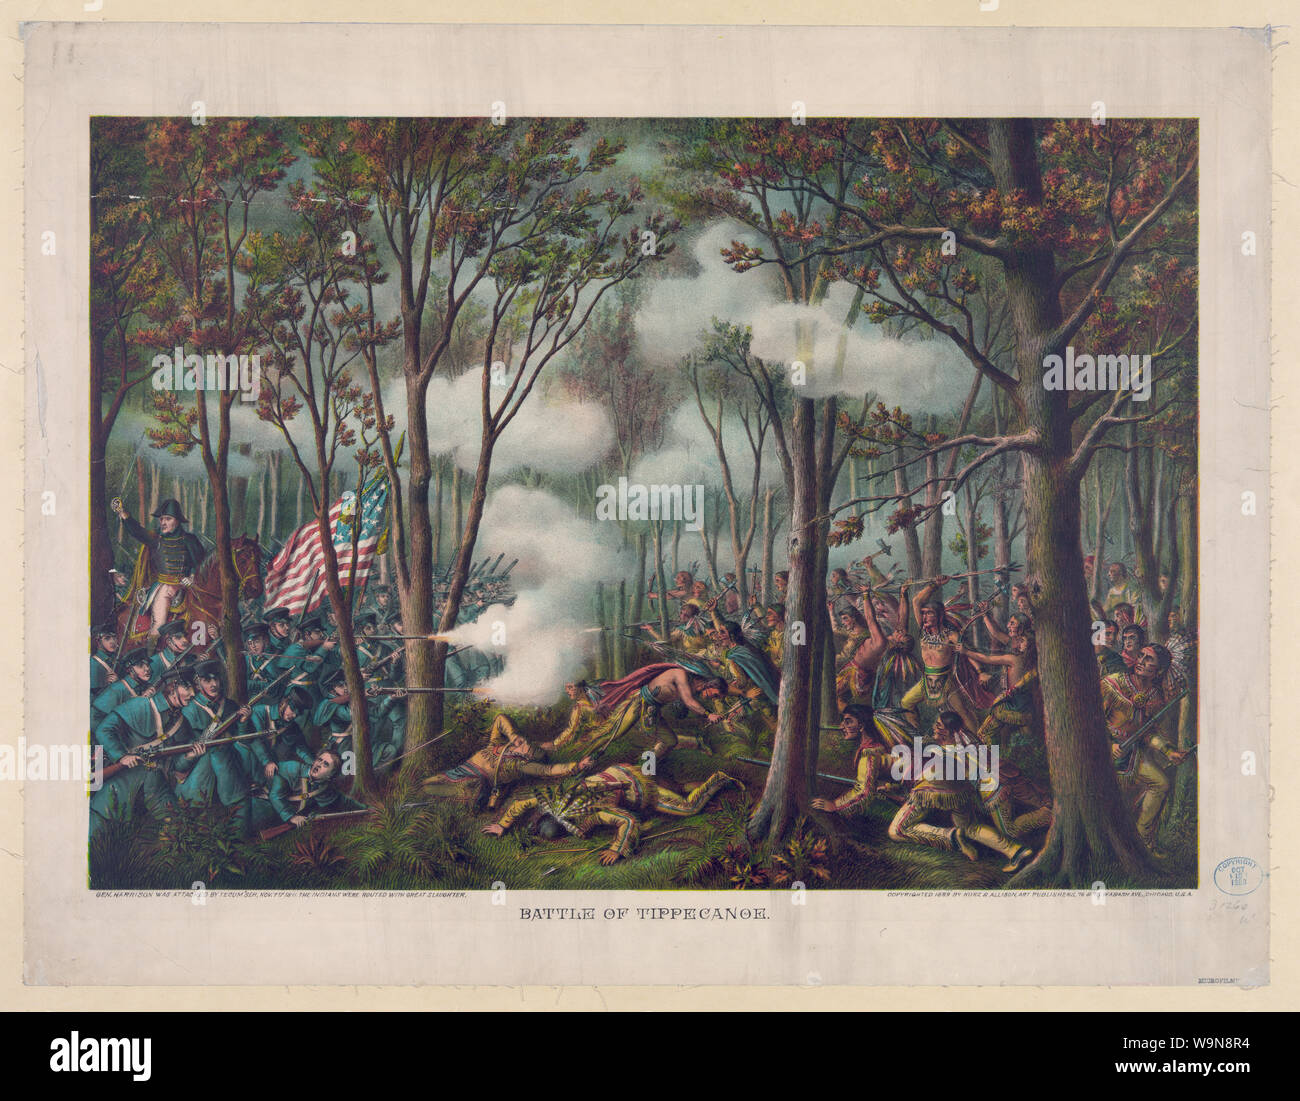 Battle of Tippecanoe Abstract: Print shows American troops under the leadership of General William Henry Harrison fighting the Indian forces of The Prophet, Tenskwatawa (the brother of Tecumseh) in a forest. Tenskwatawa was part of Tecumseh's Indian confederation. Stock Photo